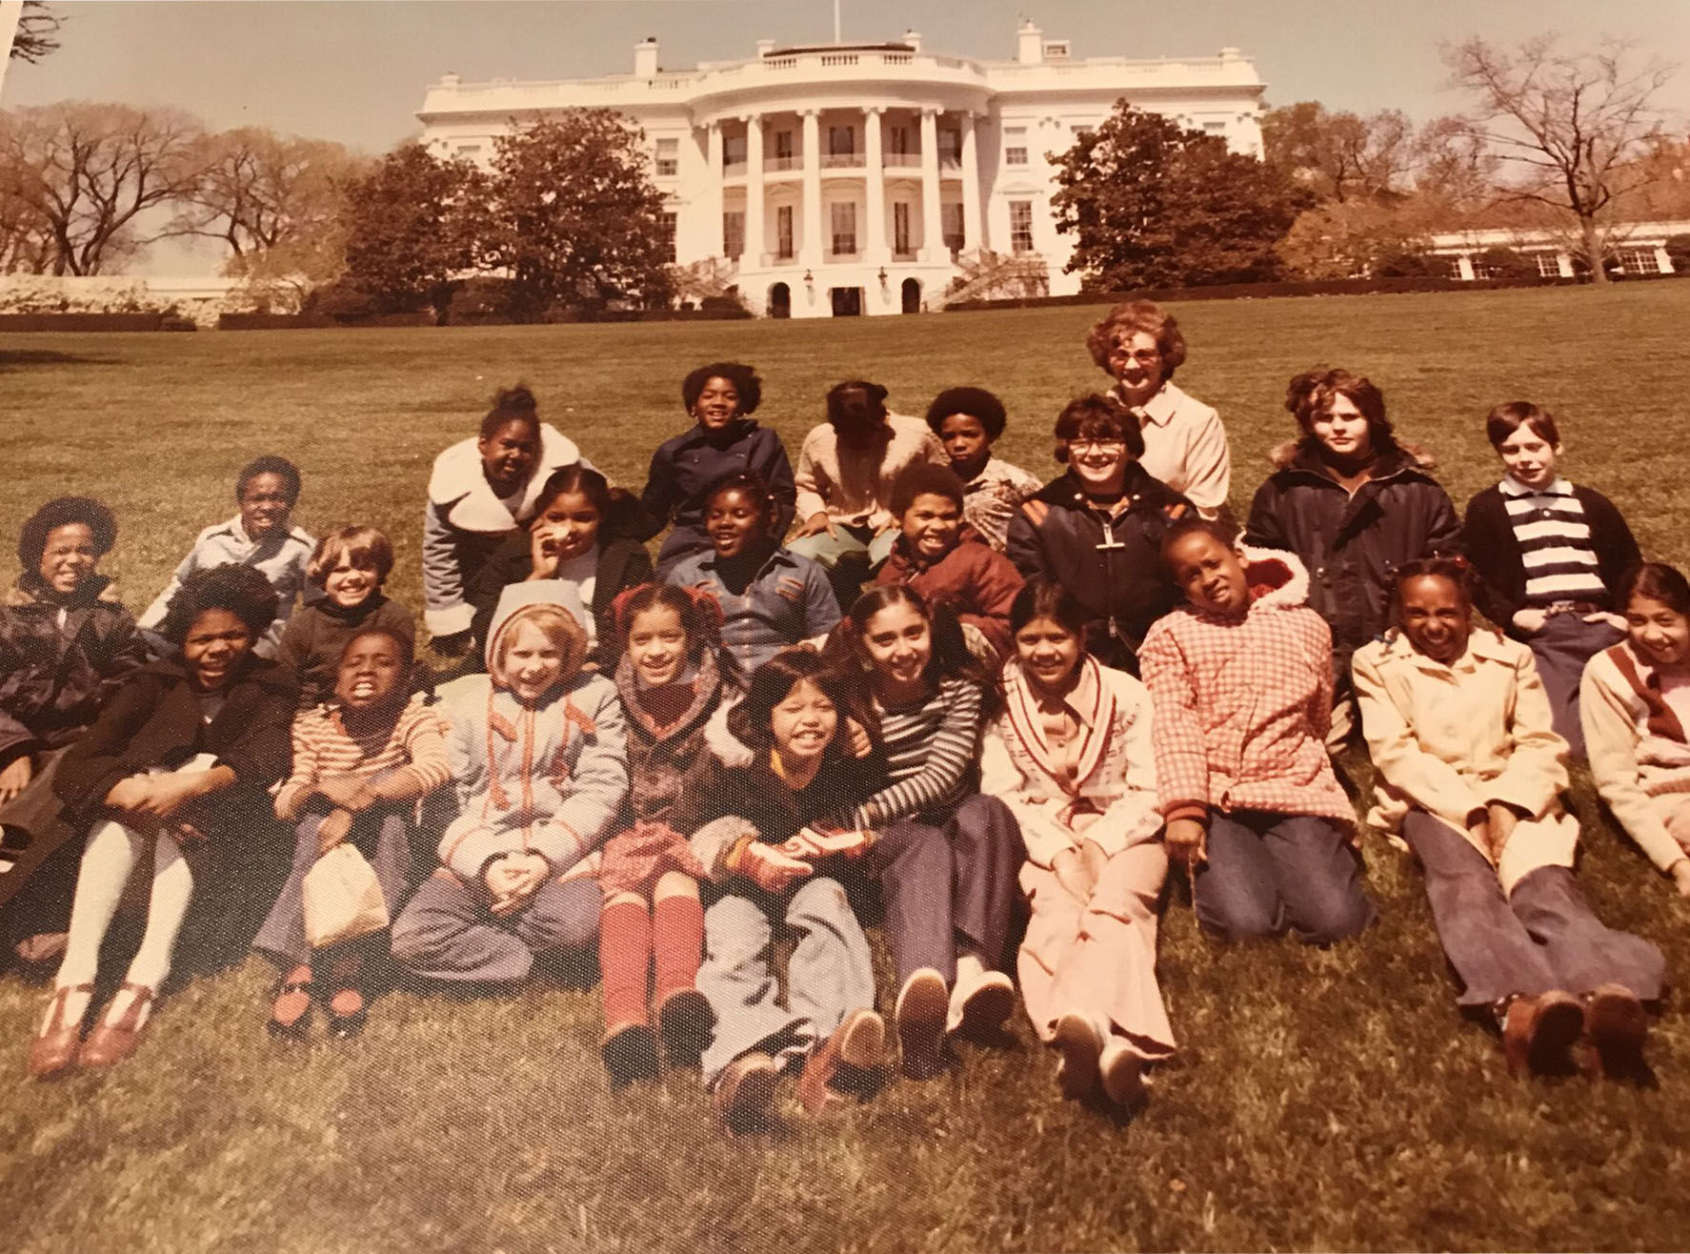 After the media frenzy settled down, things began to feel like a normal fourth-grade class.But there were special perks. Here Amy's class enjoys a special visit to the White House for their very own Easter egg roll. Amy is the third from the left in the first row. (Courtesy Verona Meeder)